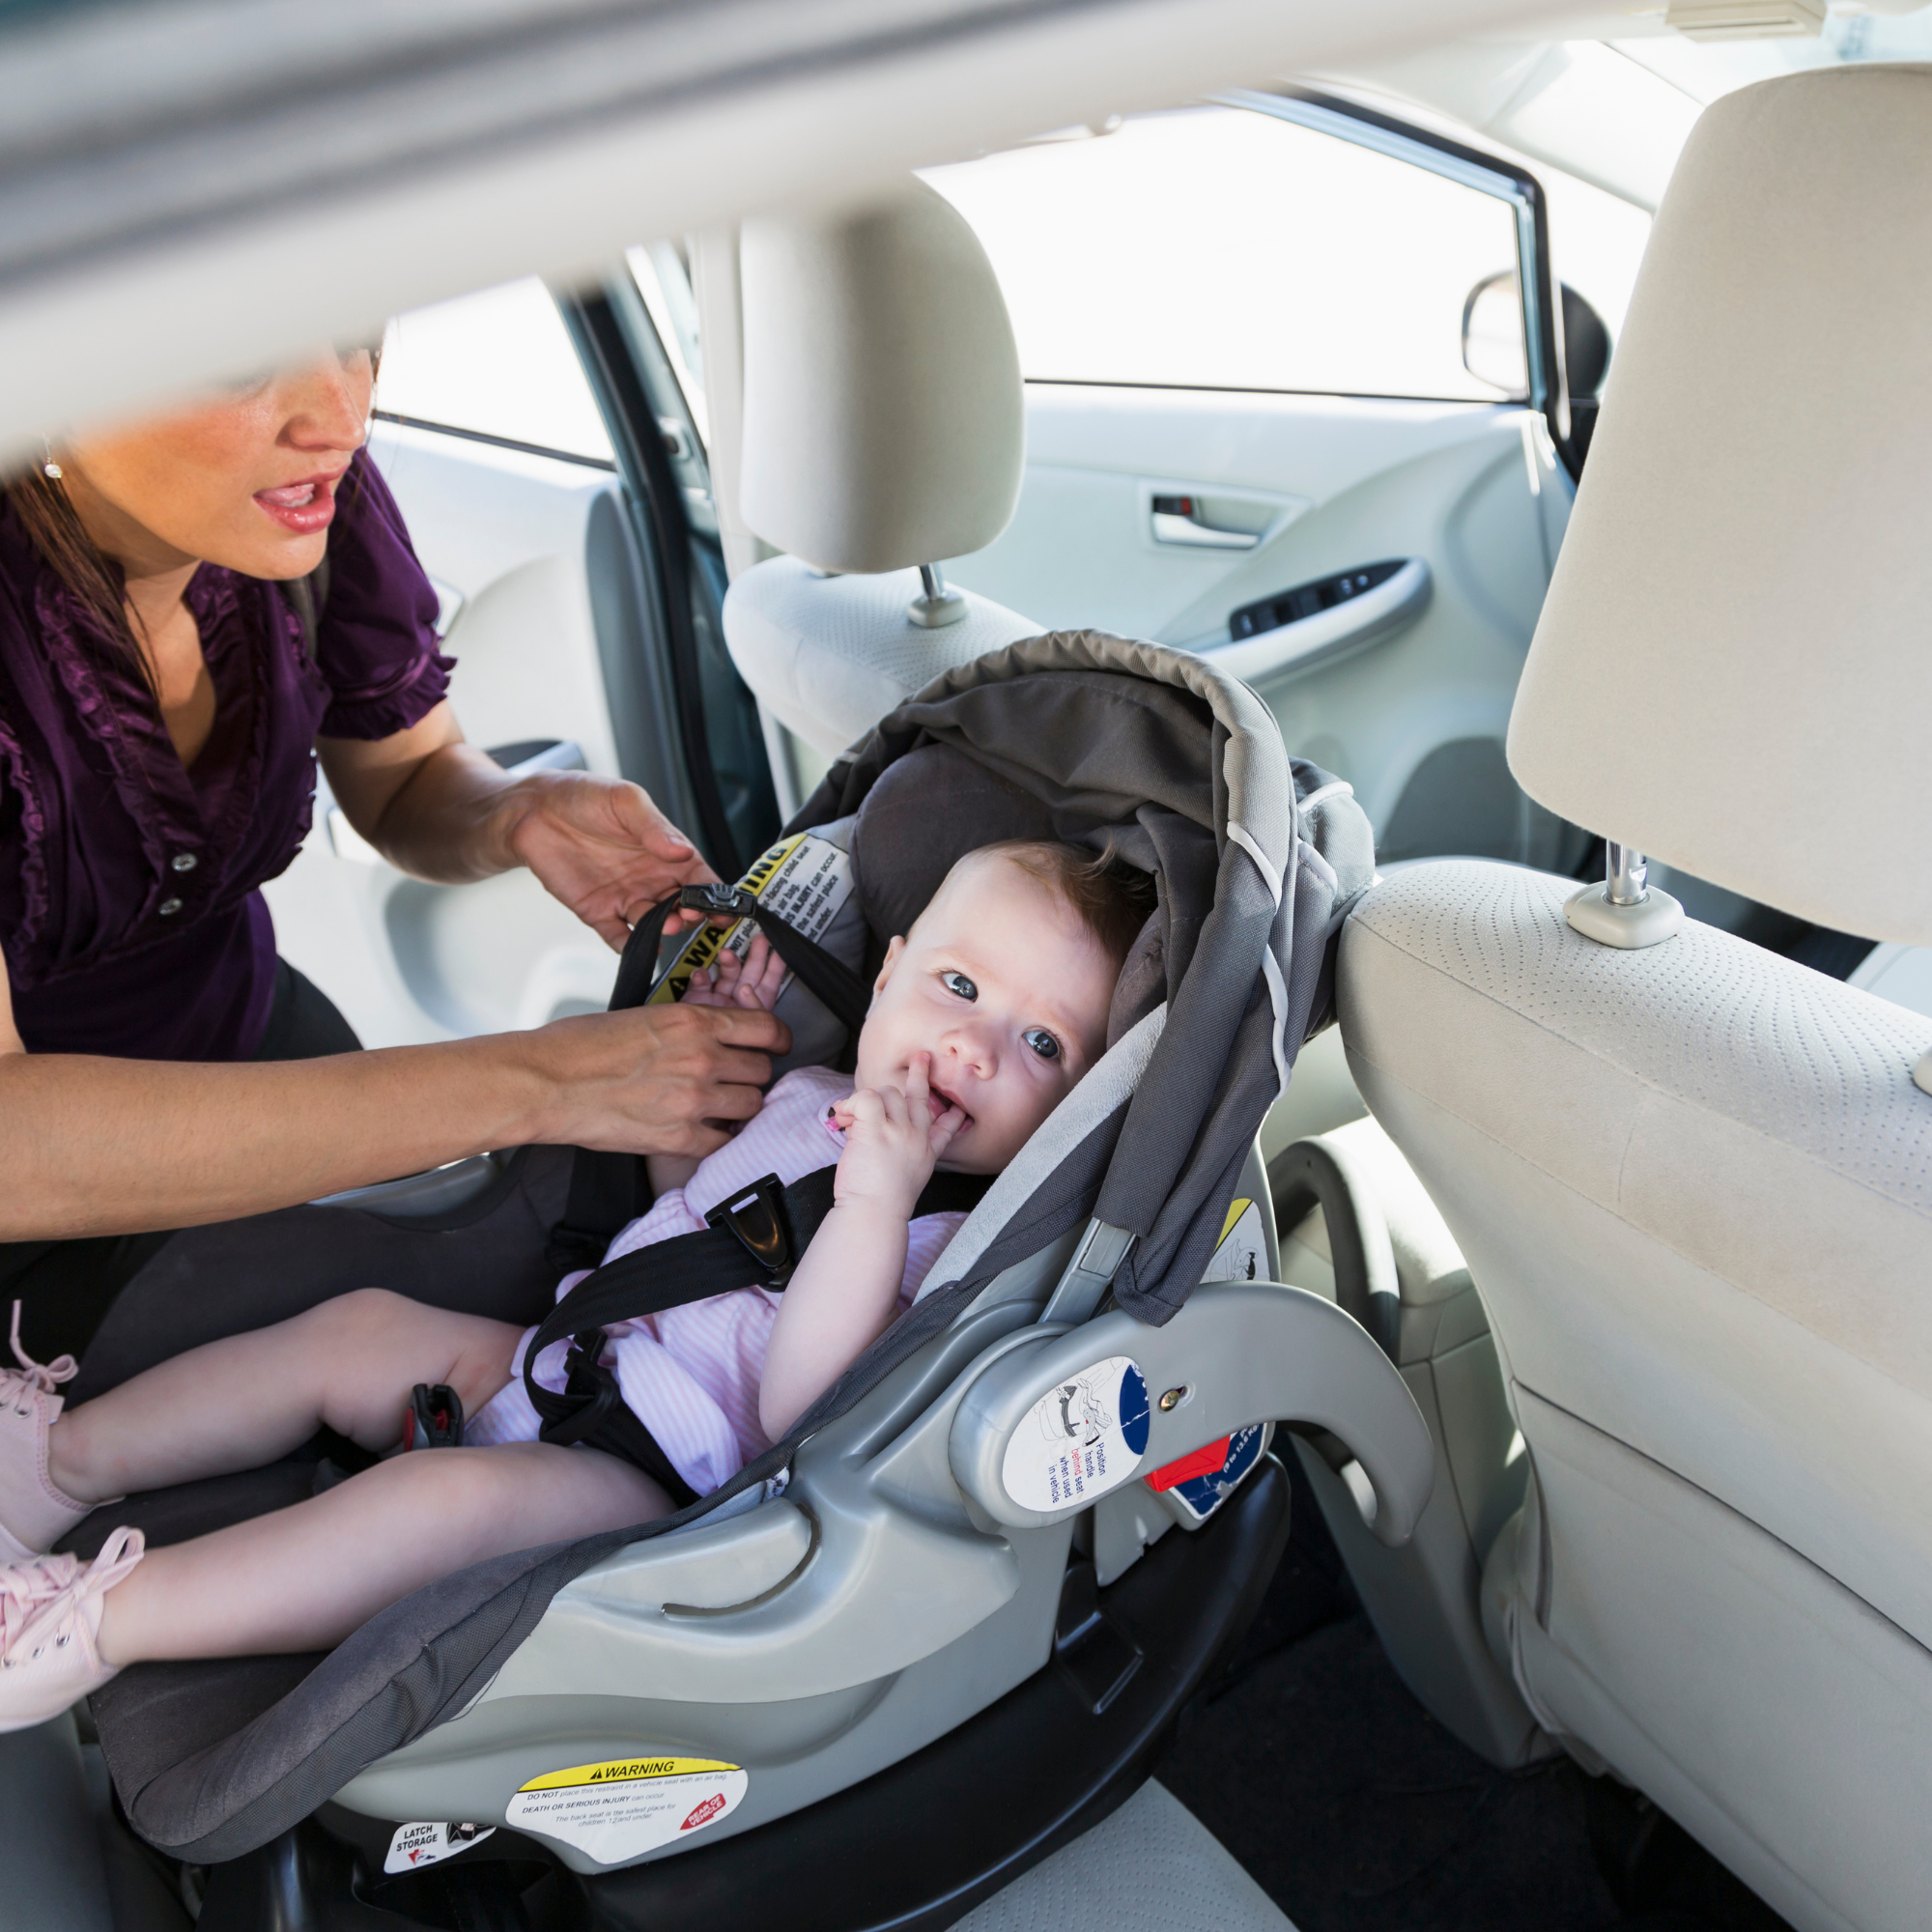 Mum placing son in a rear facing car seat | Summer Safety | Car Seat Safety - Clair de Lune UK